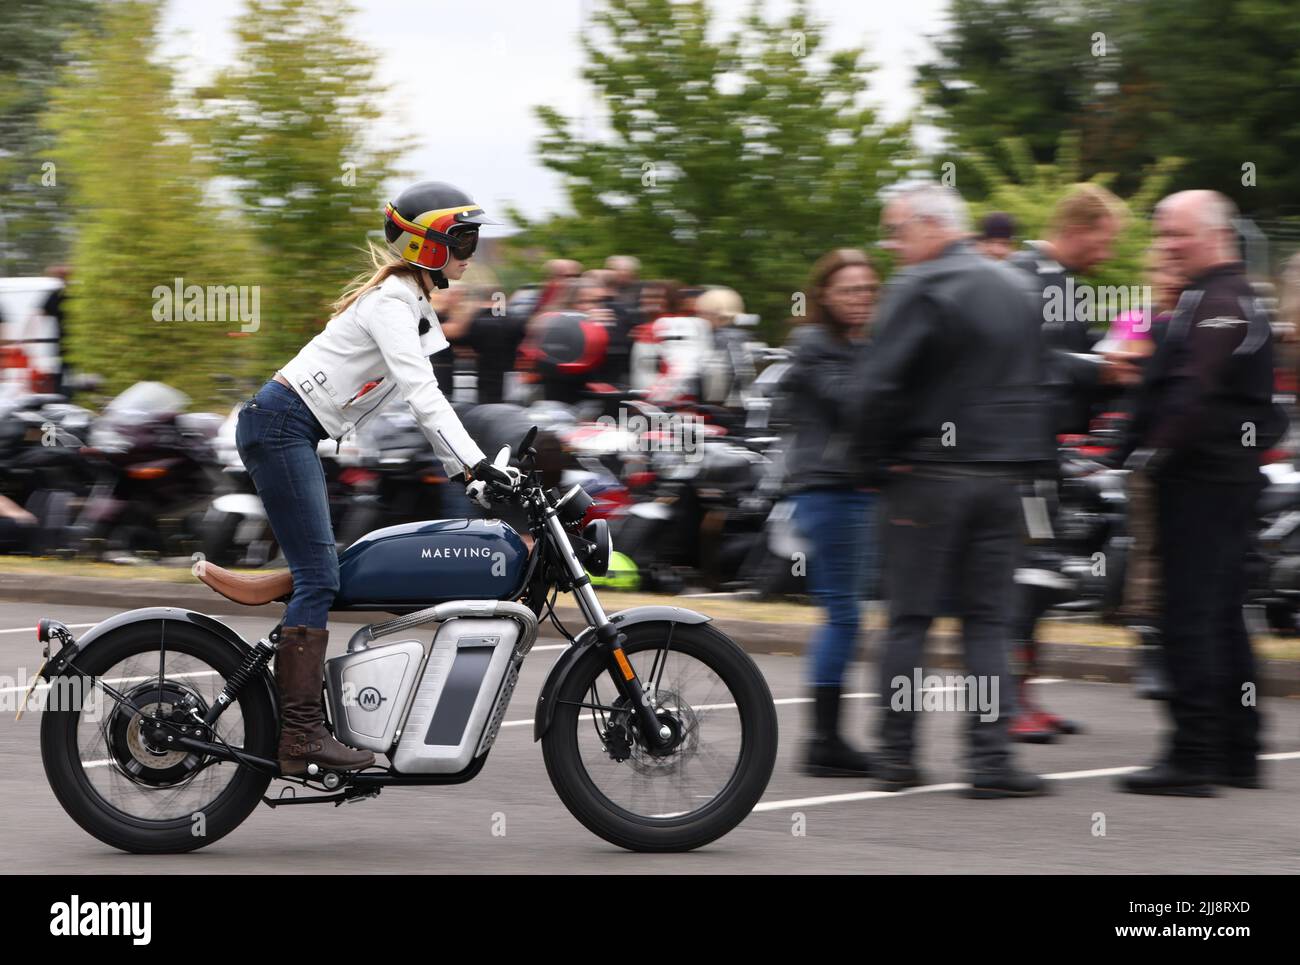 Hinckley, Leicestershire, UK. 24th July 2022. A woman rides a Maeving electric motorcycle during a World Record attempt for the largest Female biker meet at the global headquarters for Triumph Motorcycles. Credit Darren Staples/Alamy Live News. Stock Photo